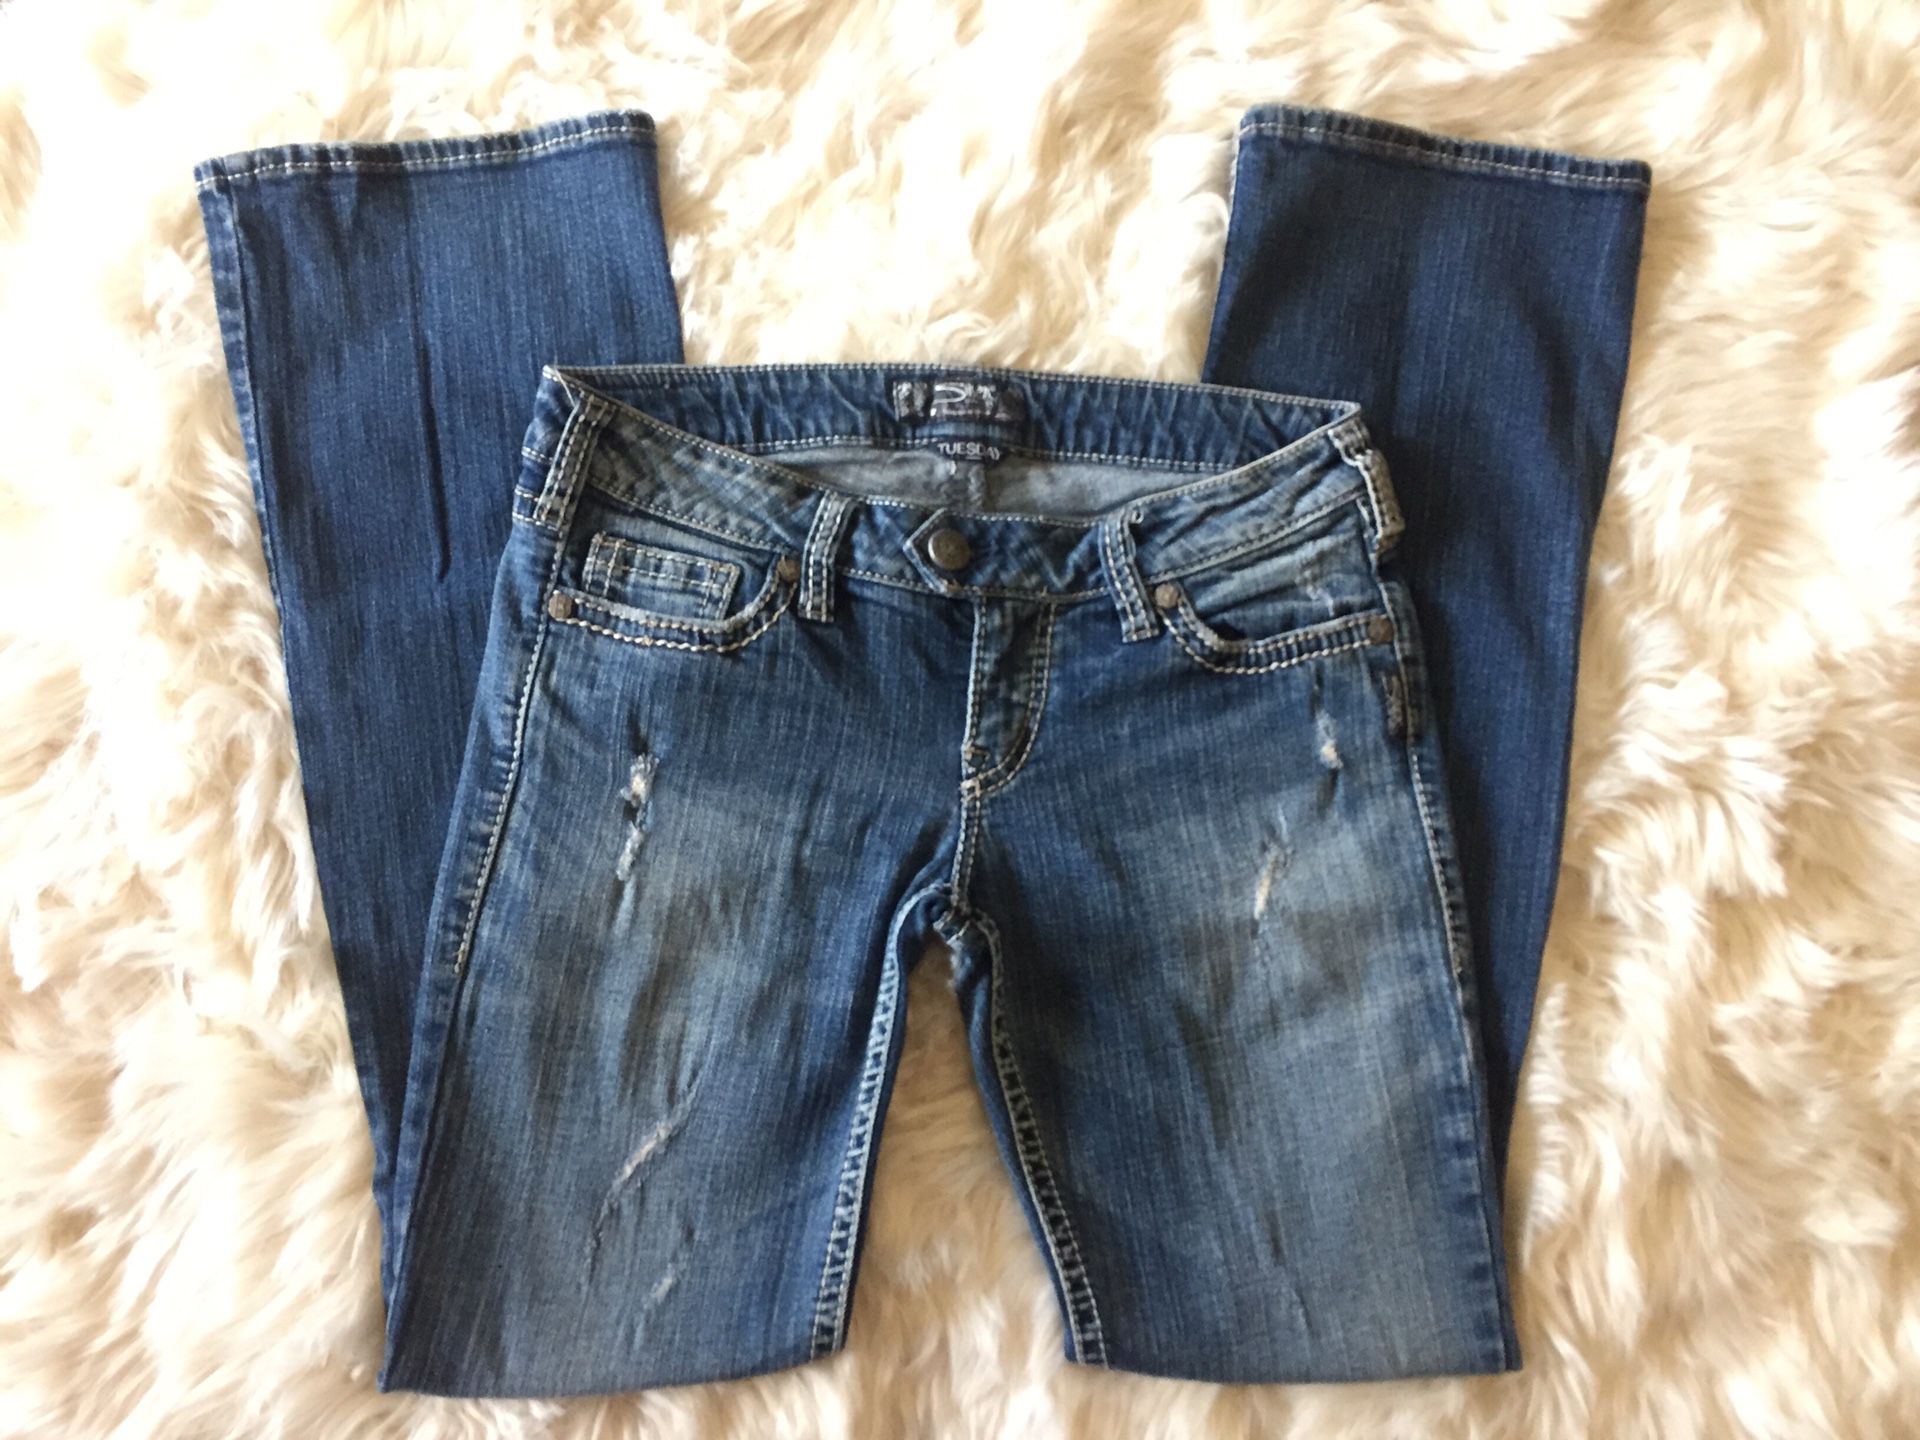 Silver Jeans Co. size 29